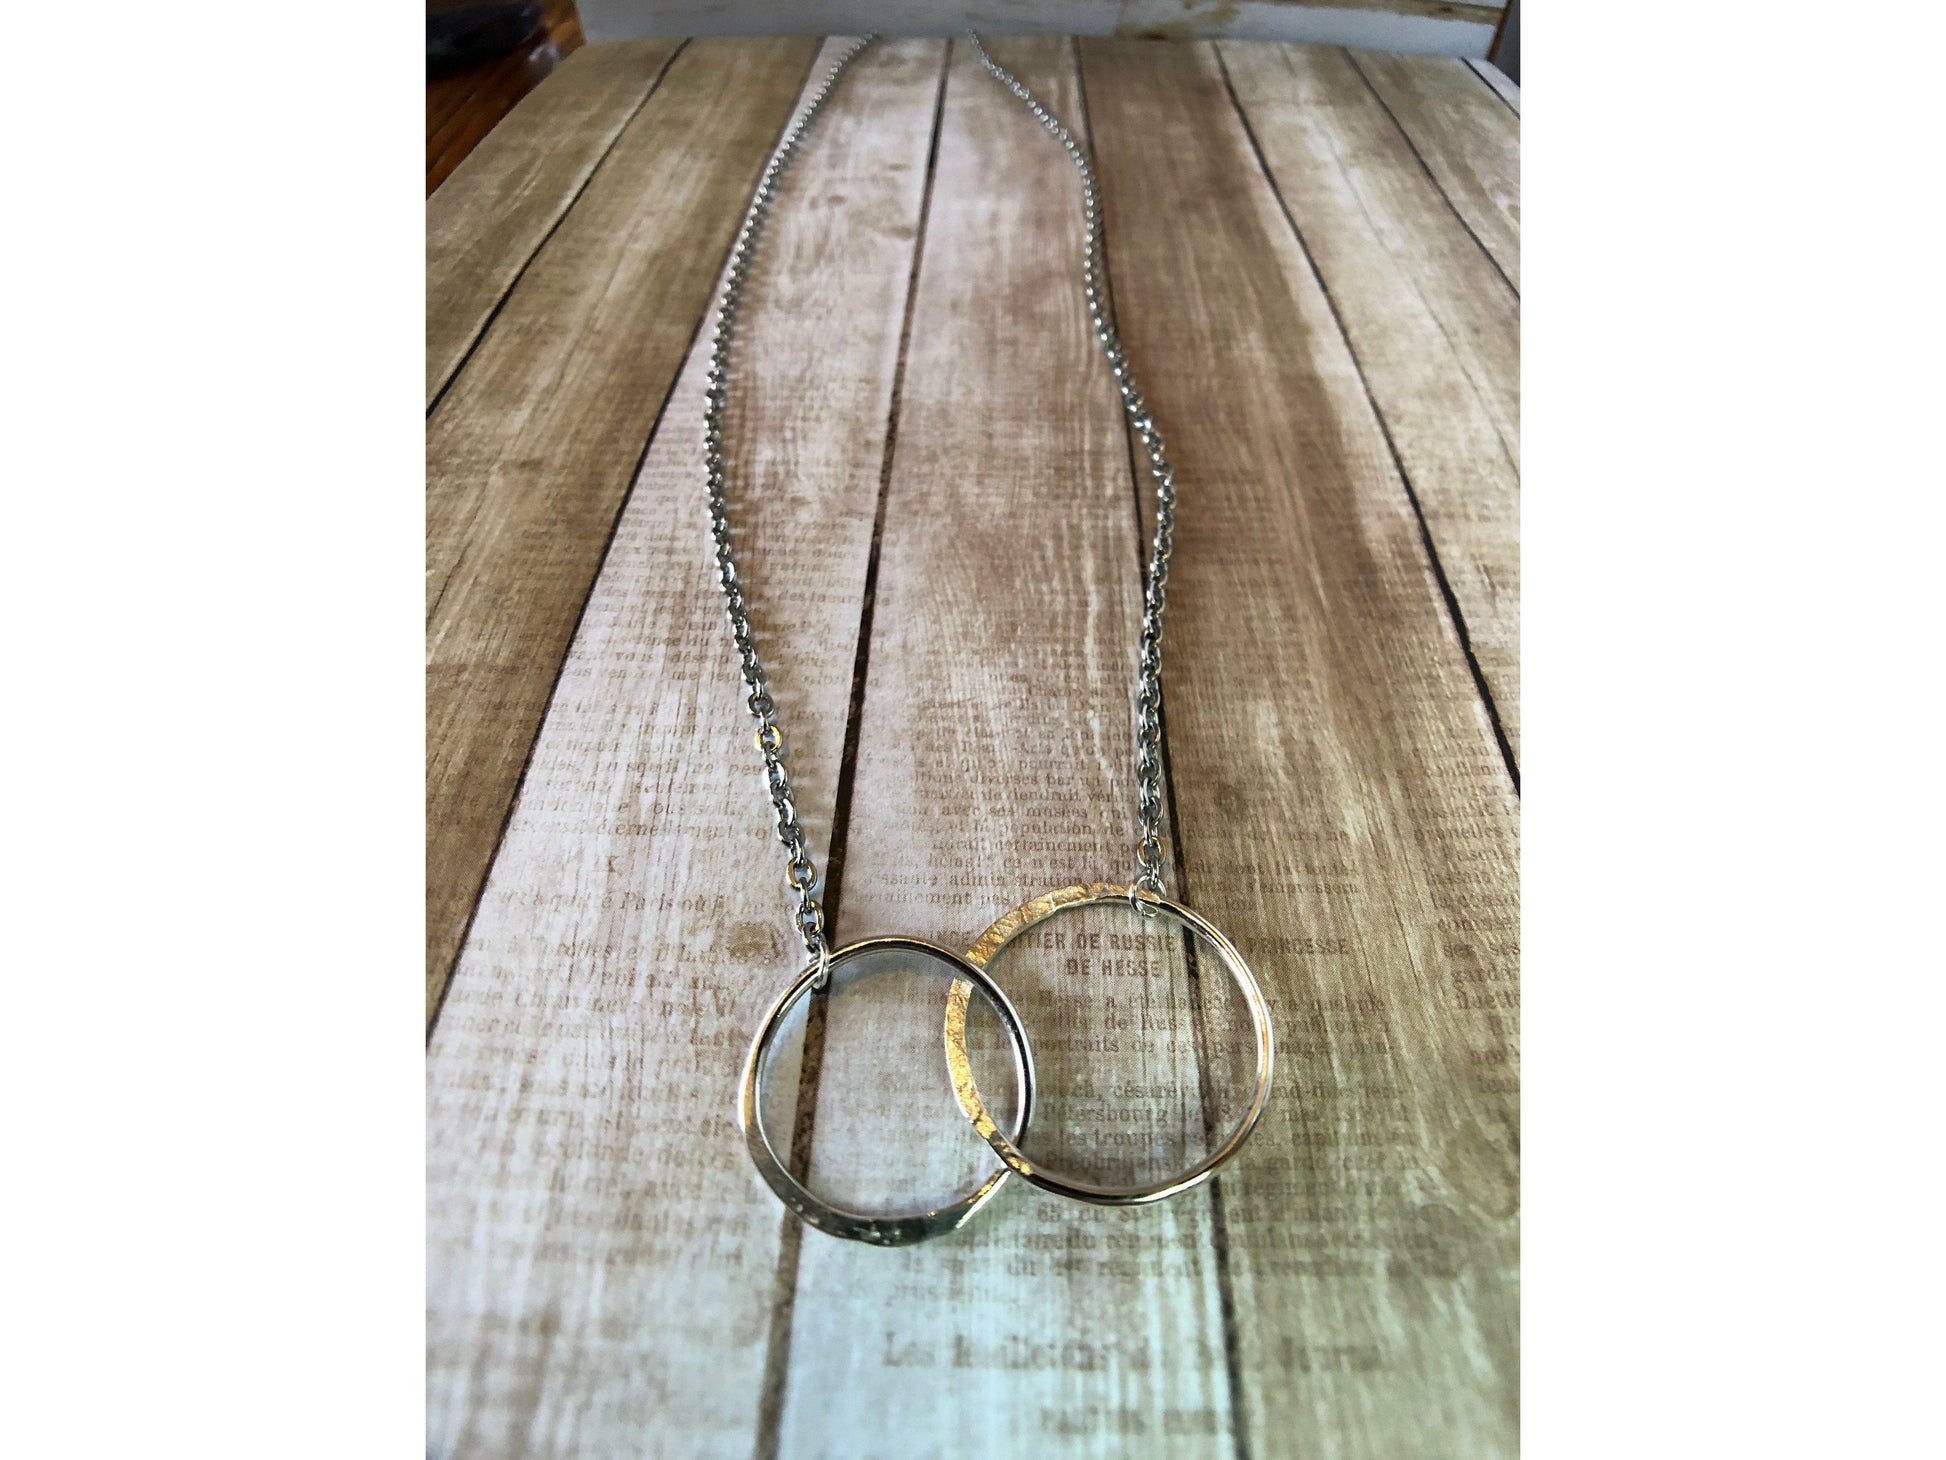 interlocking-circle-necklace-sterling-silver-infinity-necklace-mother-and-child-necklace-double-circle-necklace-silver-geometric-jewelry